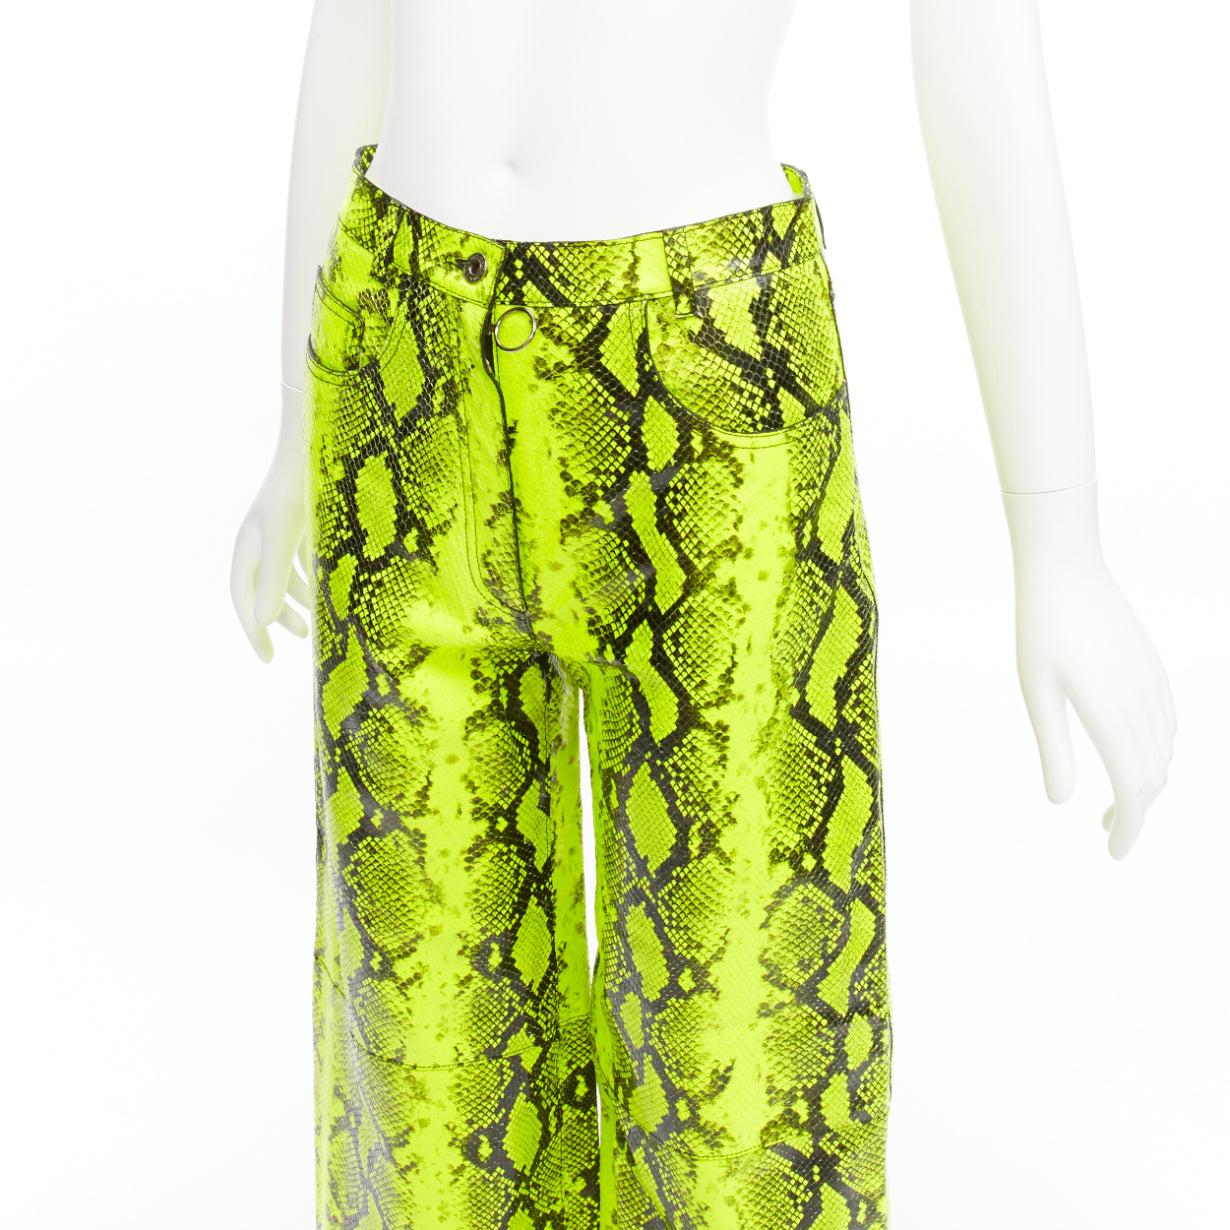 OFF WHITE Virgil Abloh 2019 Runway neon yellow genuine leather wide leg pants IT40 S
Reference: TGAS/D00710
Brand: Off White
Designer: Virgil Abloh
Collection: SS2019 Look 43 - Runway
Material: Leather
Color: Neon Yellow
Pattern: Animal